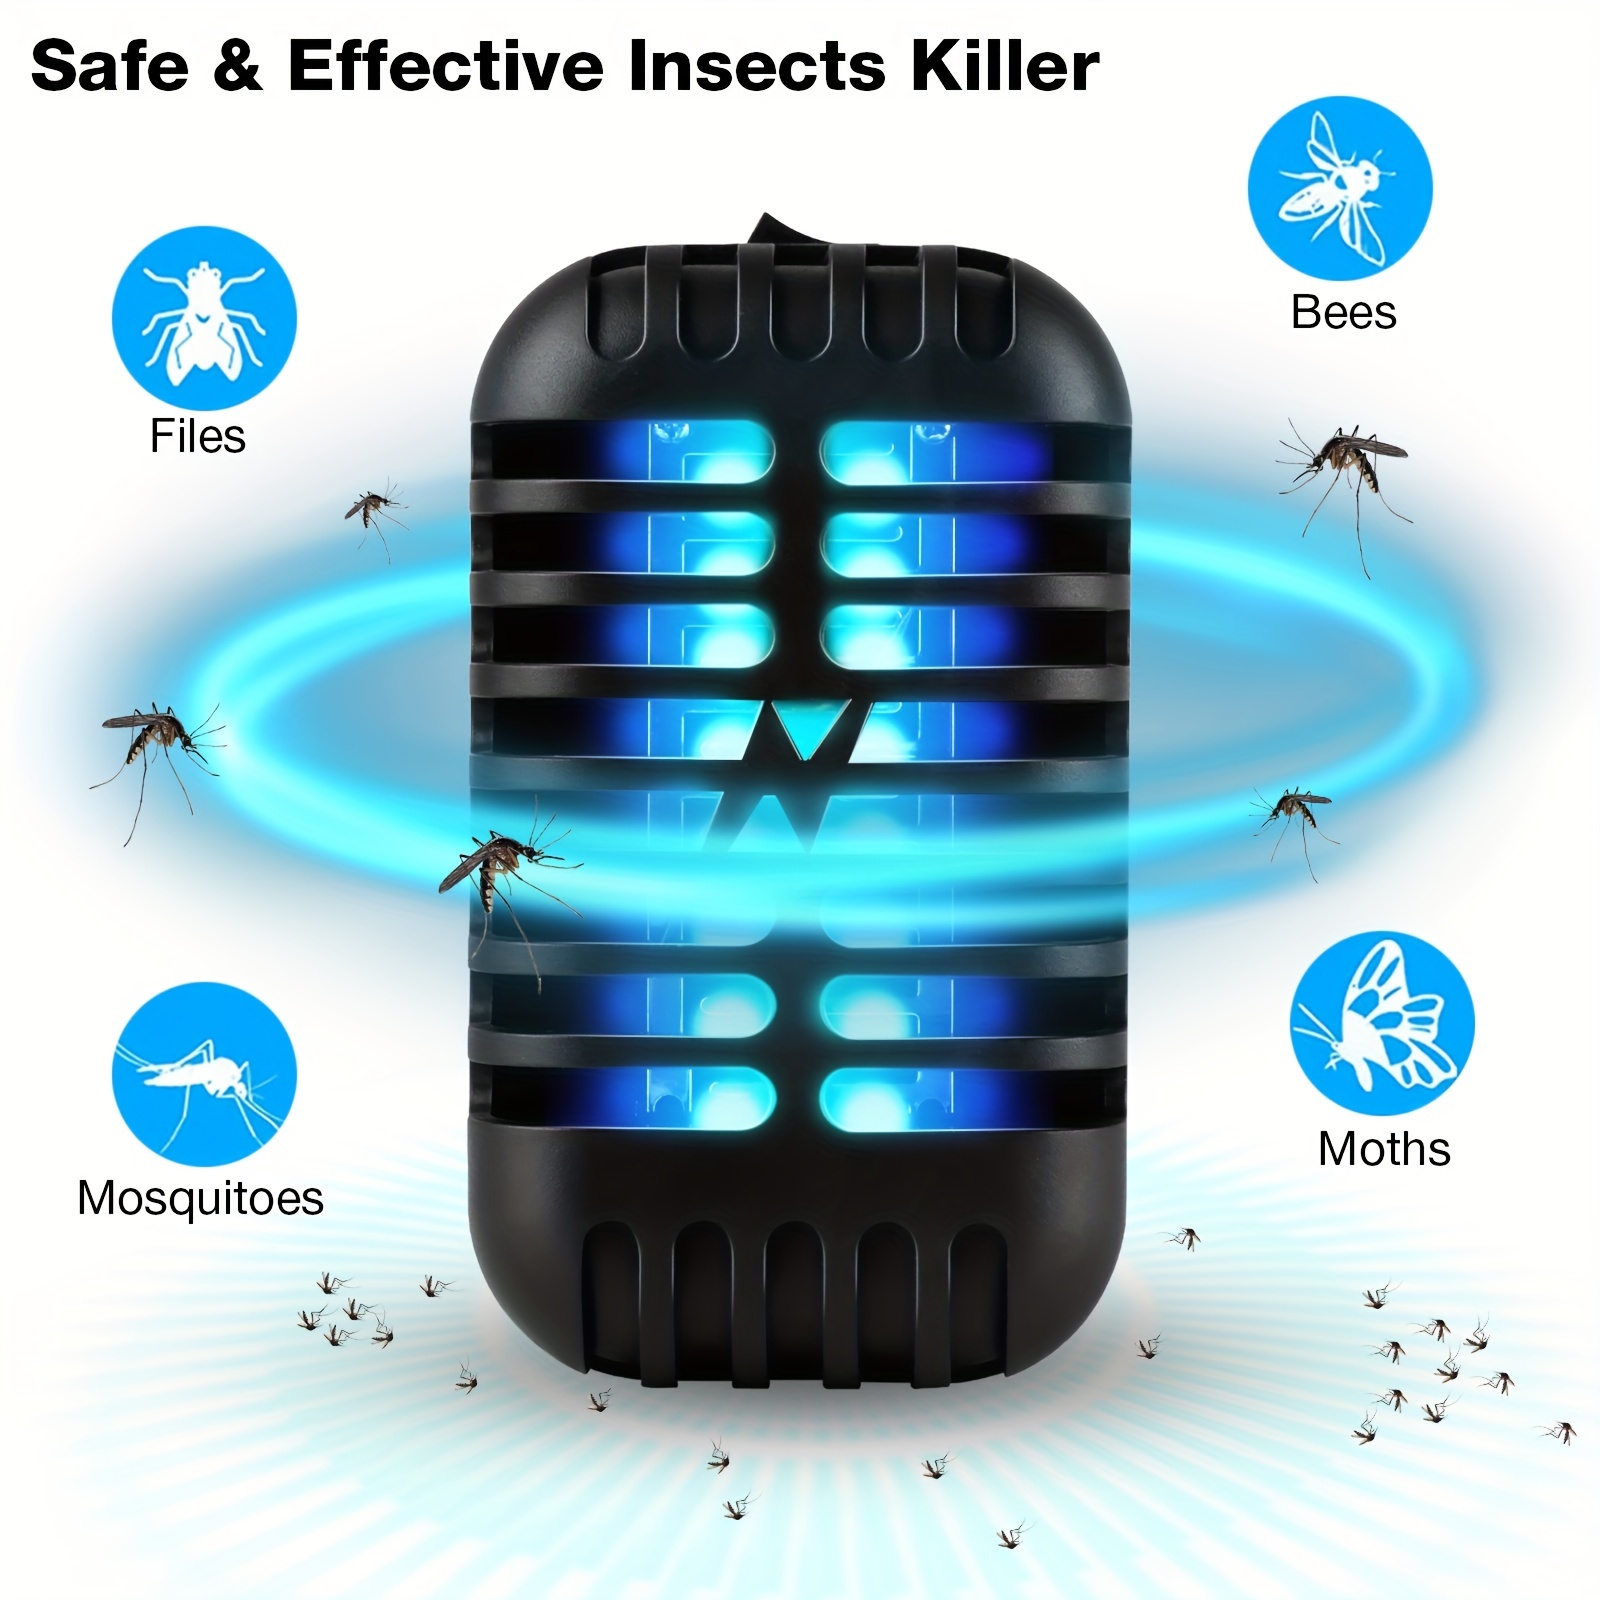 10 Best Bug Zappers for Chemical-Free Pest Control